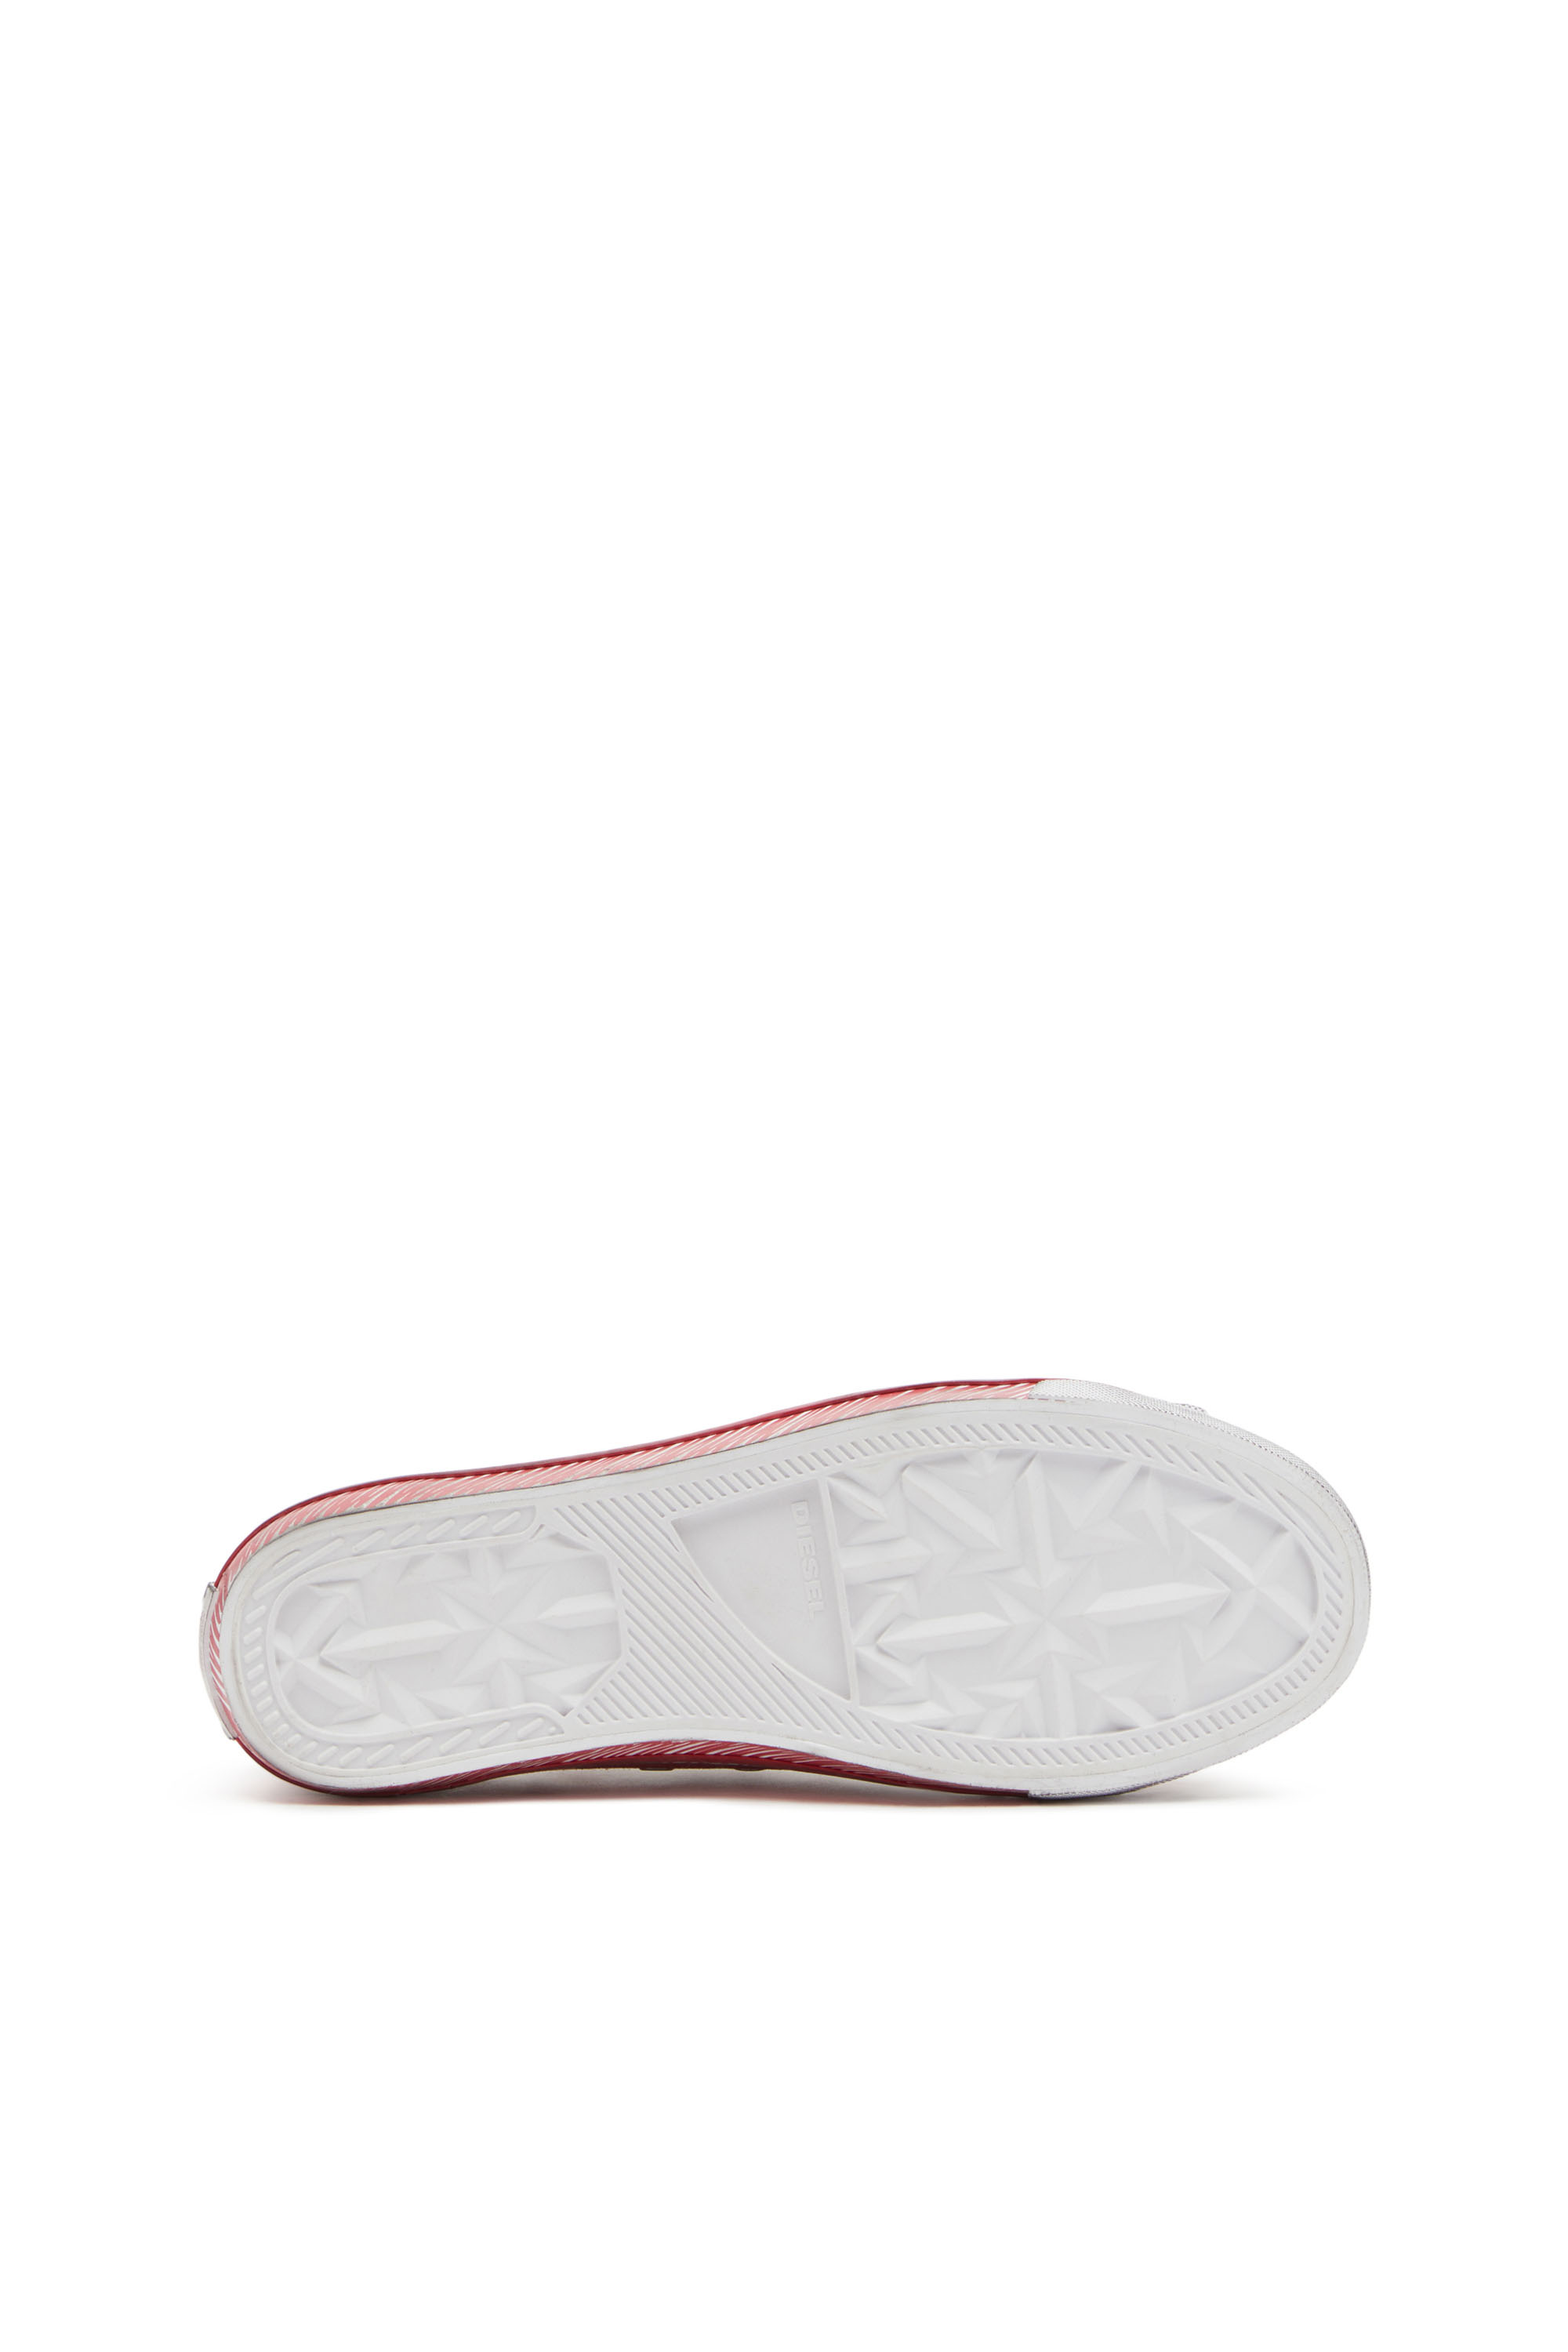 Diesel - S-ATHOS LOW, White/Red - Image 4